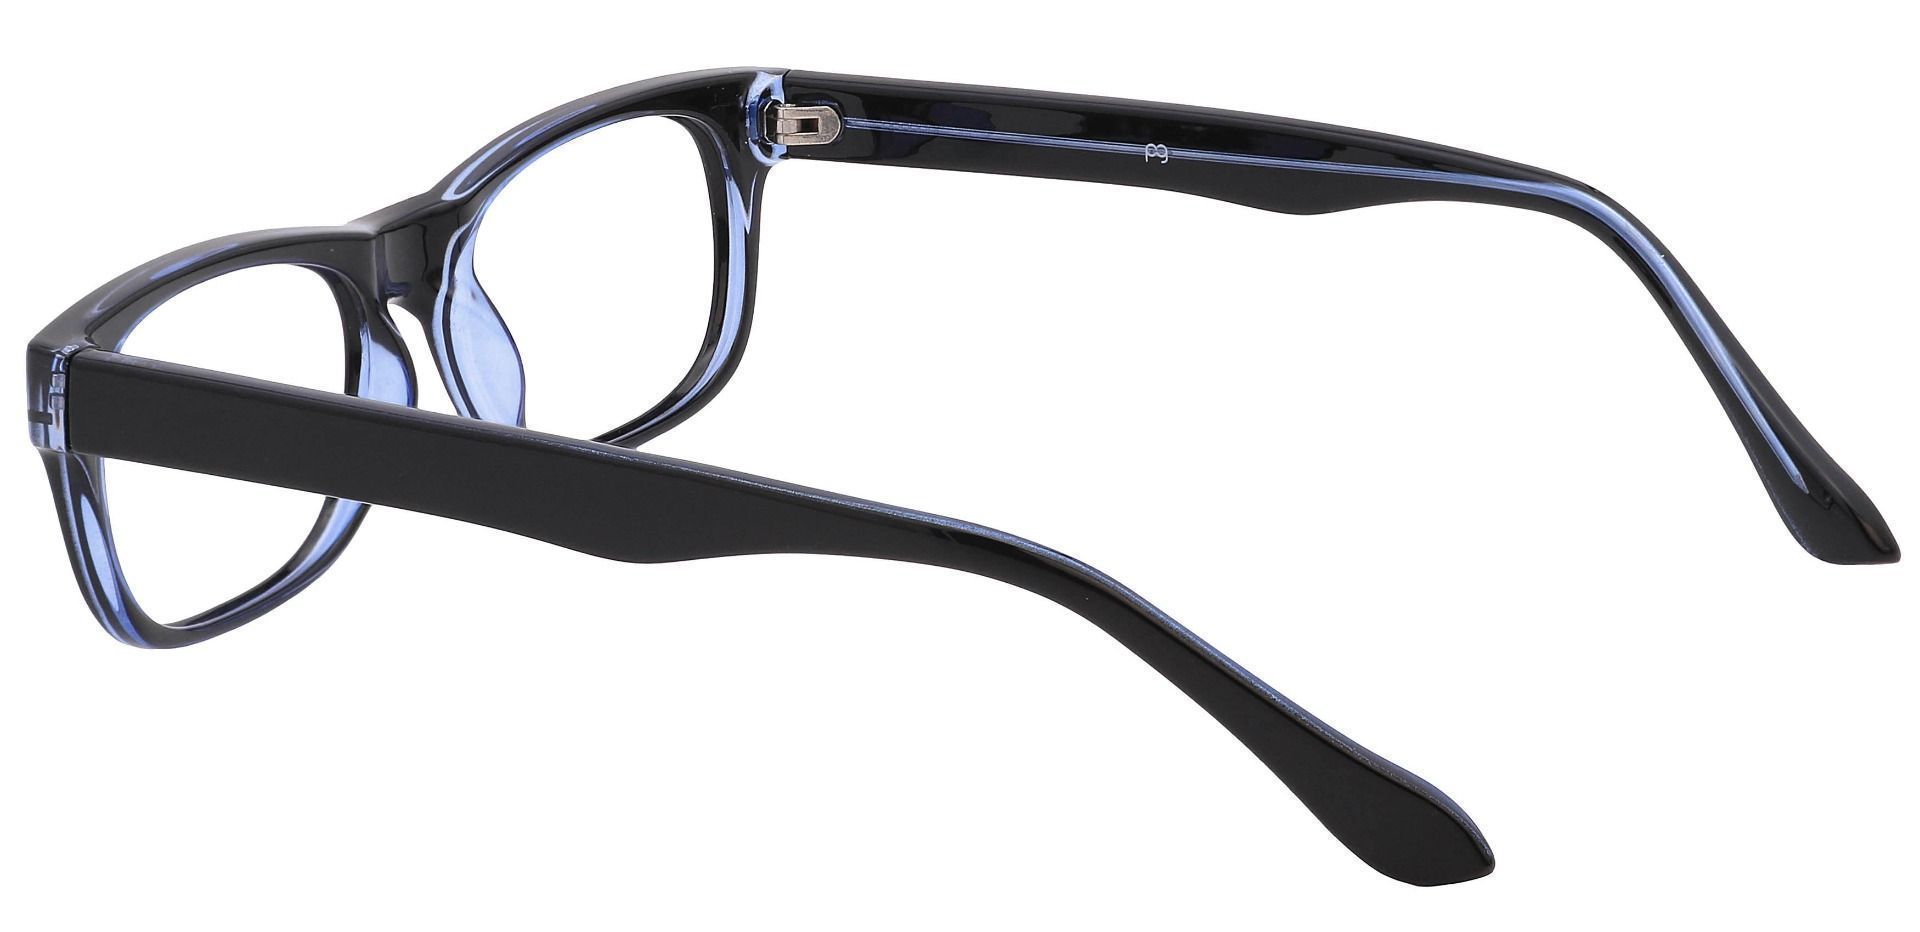 Murphy Rectangle Reading Glasses - The Frame Is Blue And Black